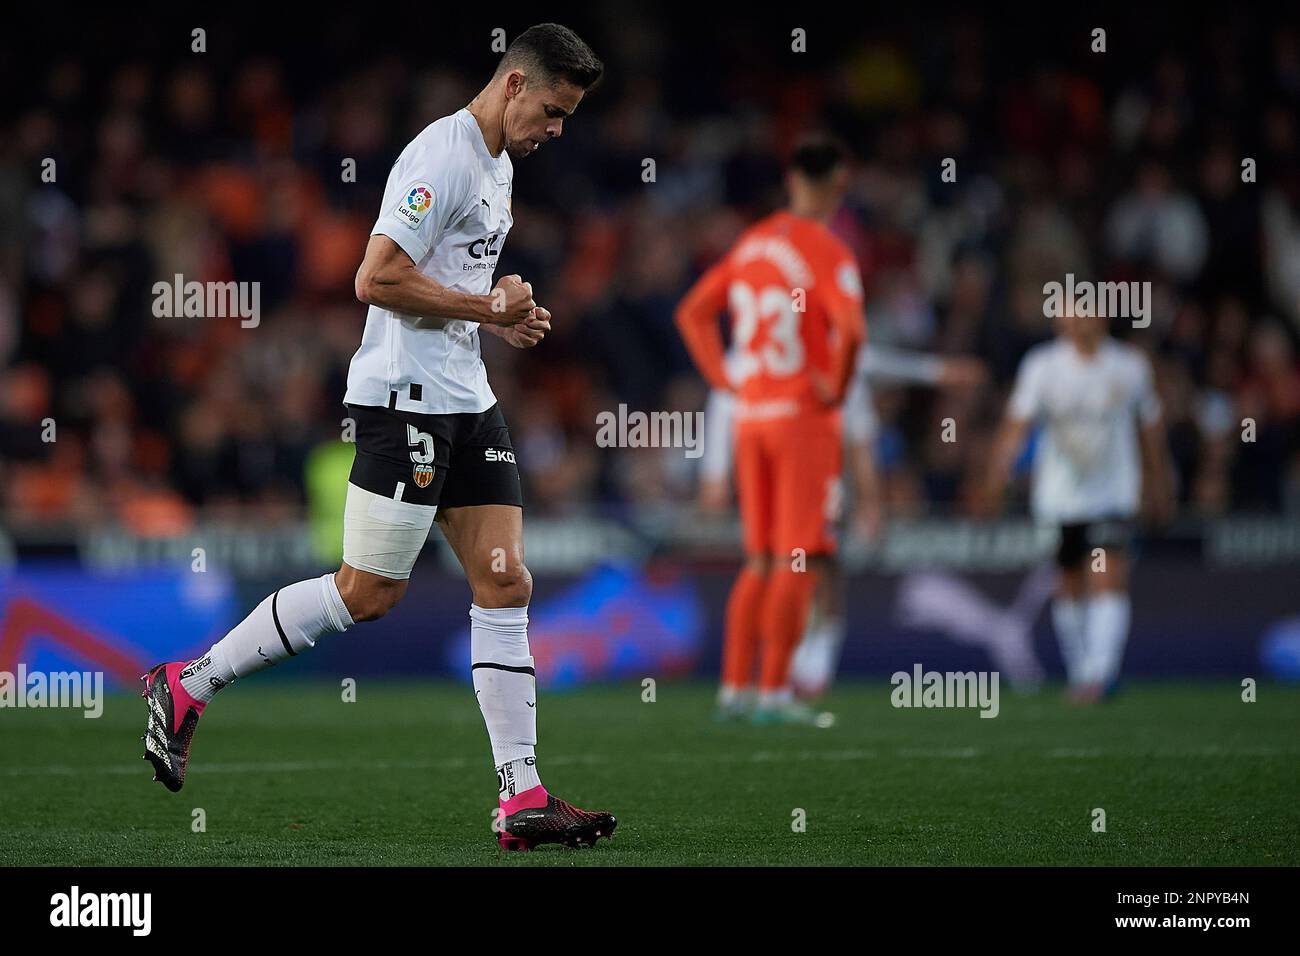 Gabriel Paulista of Valencia CF during the La Liga match between Valencia and Real Sociedad played at Mestalla Stadium on February 25 in Valencia, Spain. (Photo by PRESSIN) Stock Photo